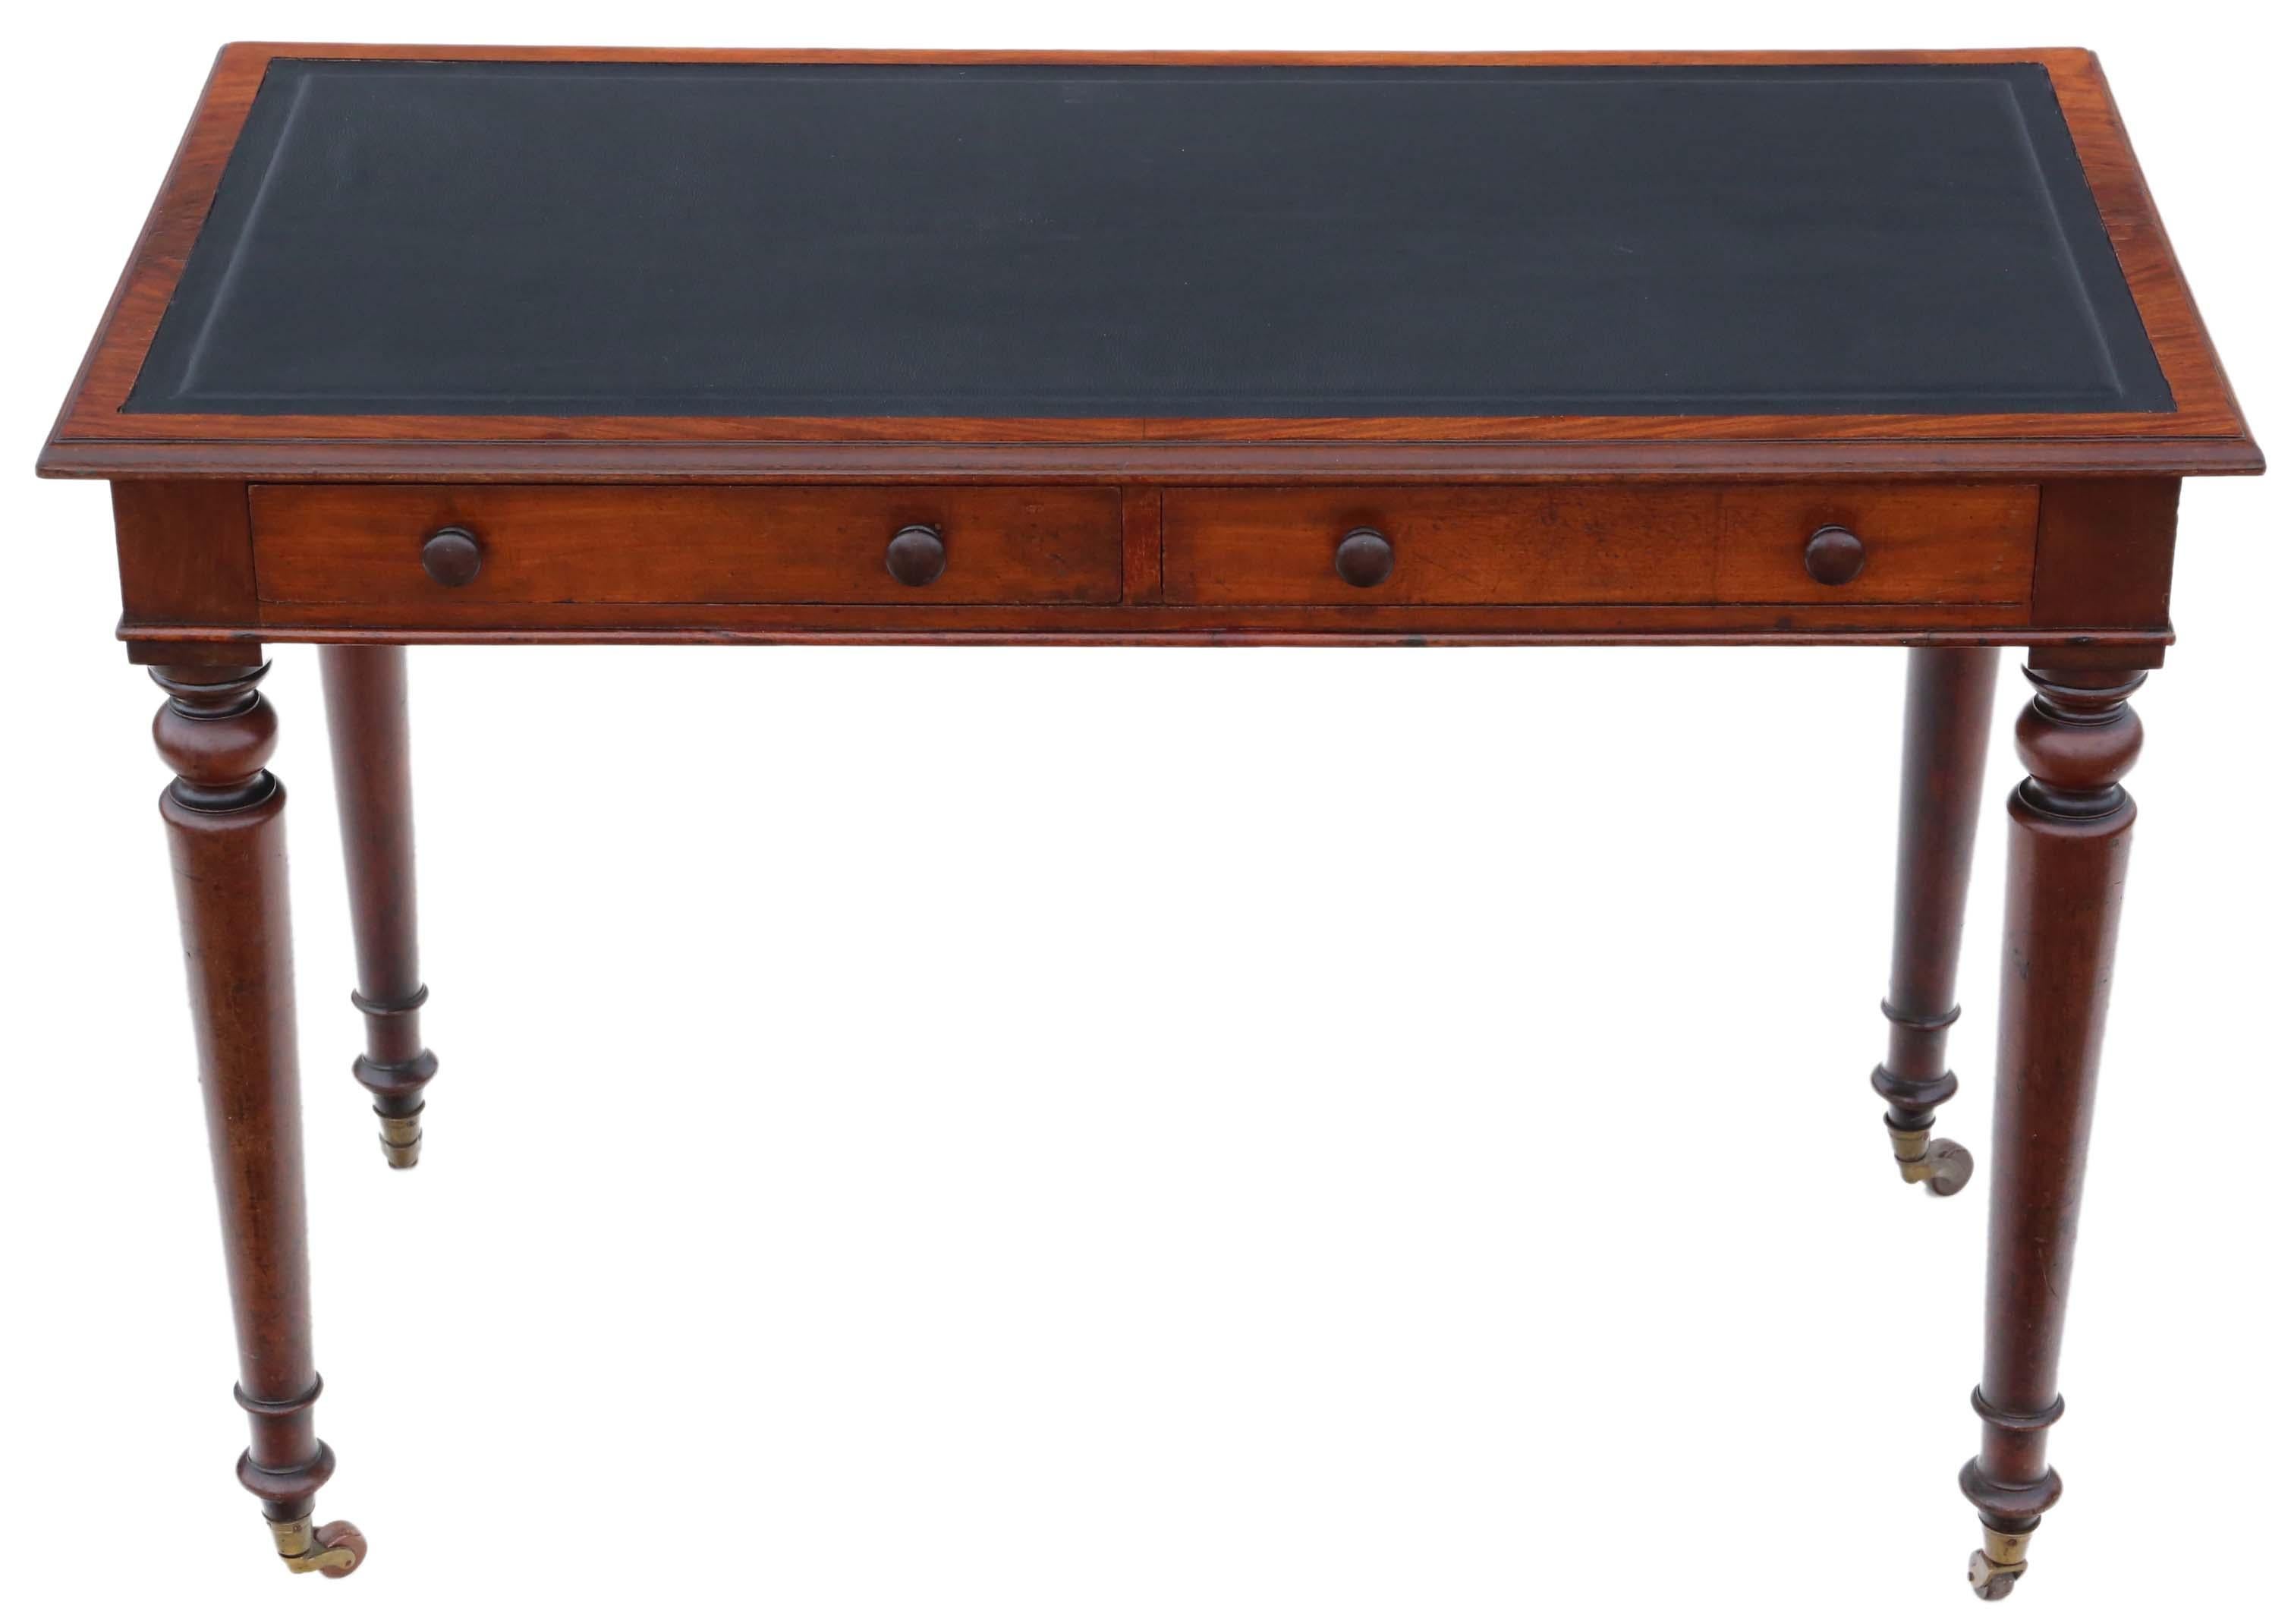 Antique fine quality 19th Century mahogany writing side table desk C1850. Lovely age colour and patina.

Solid, no loose joints or woodworm. Full of age, character and charm. The mahogany lined drawers slide freely.

As new replacement black